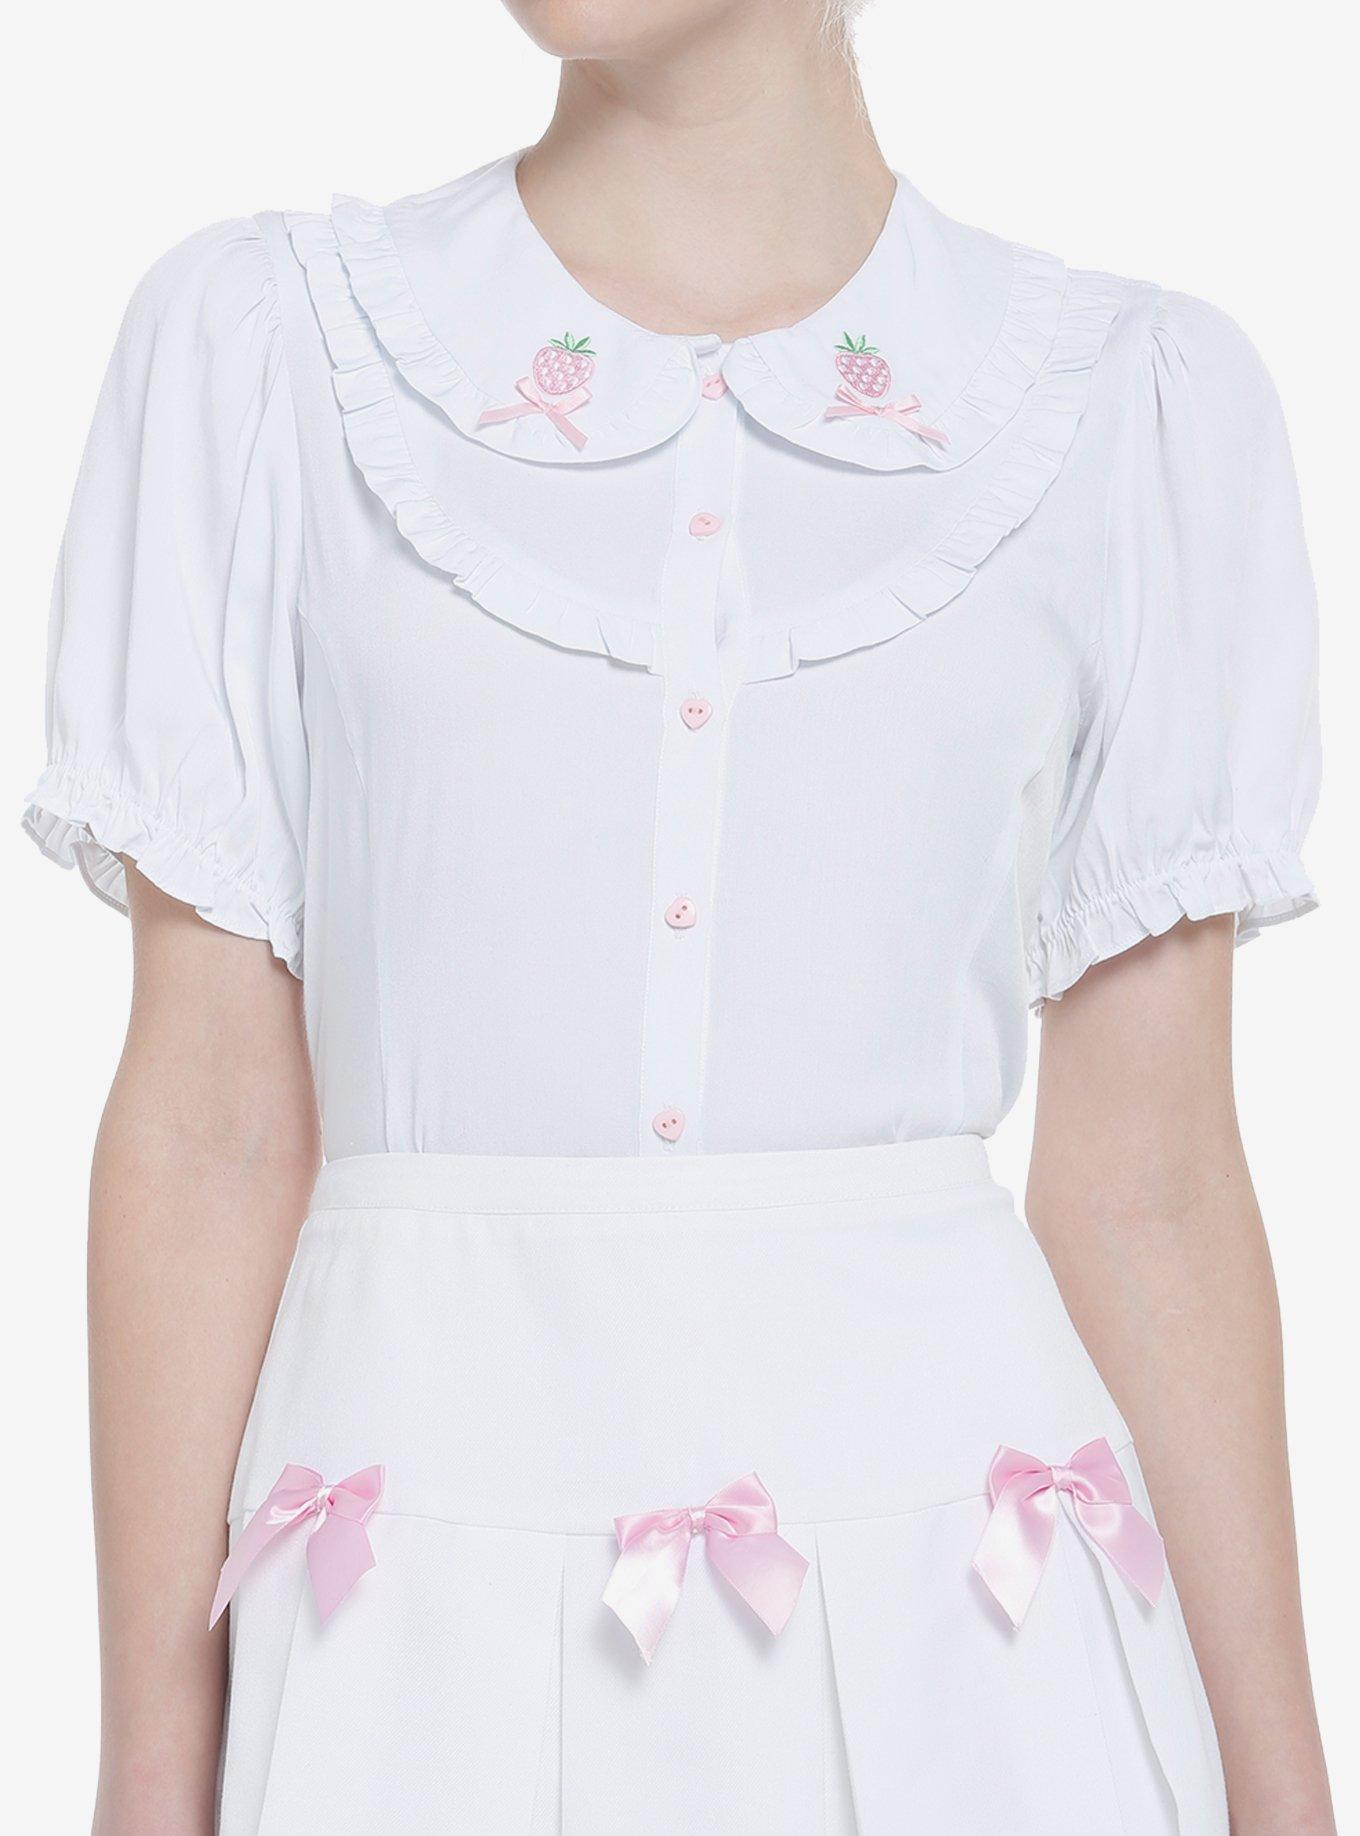 Strawberries & Hearts Ruffled Girls Woven Button-Up, WHITE, hi-res